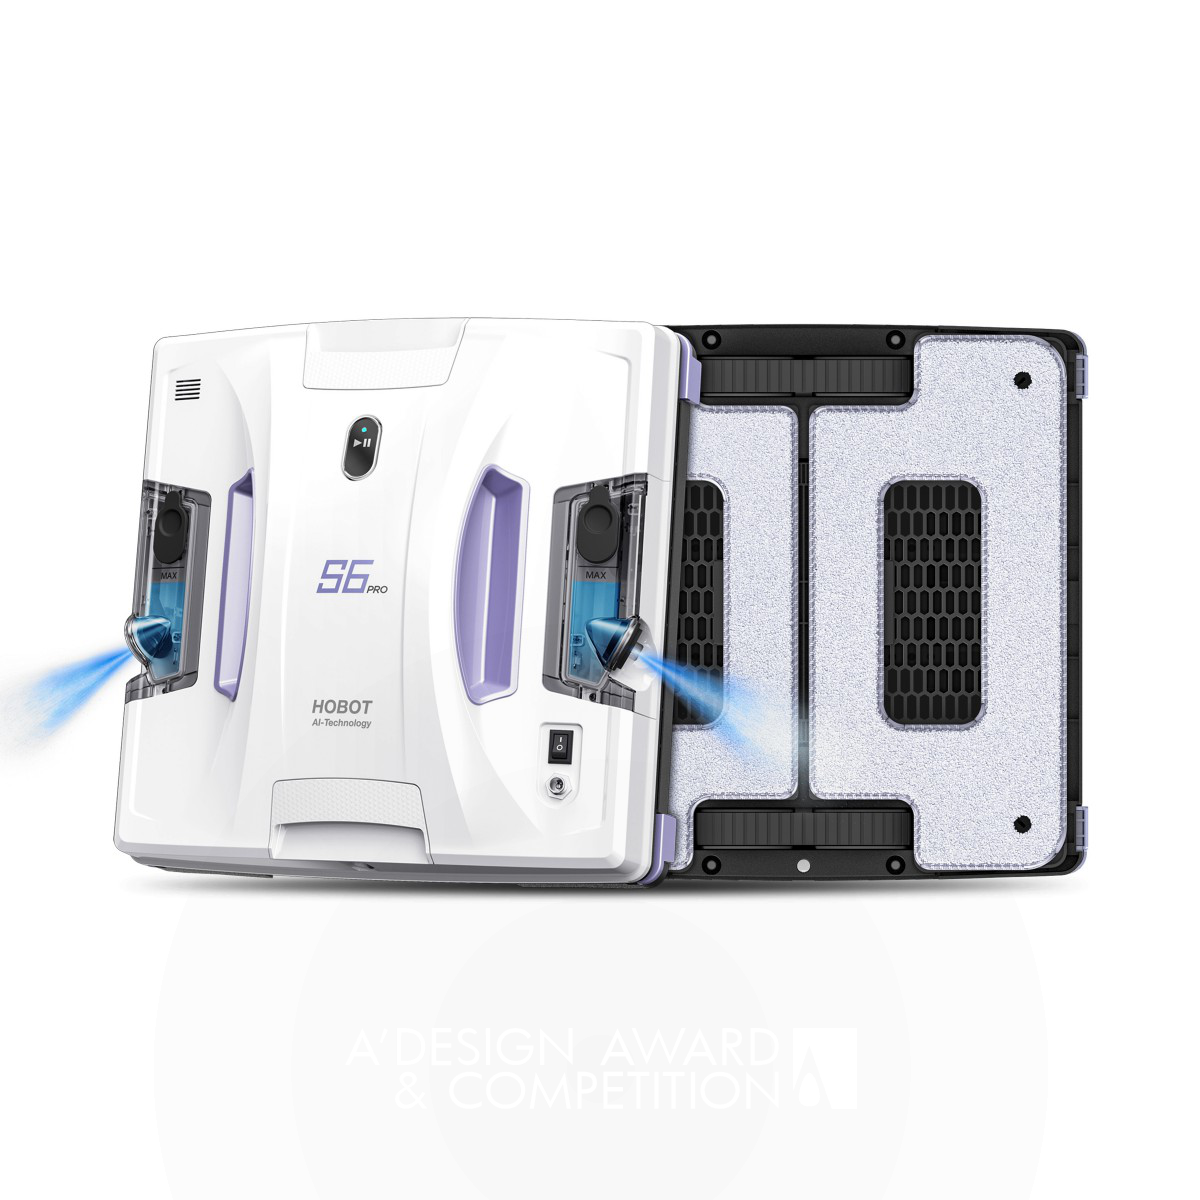 Hobot S6 Pro Window Cleaning Robot